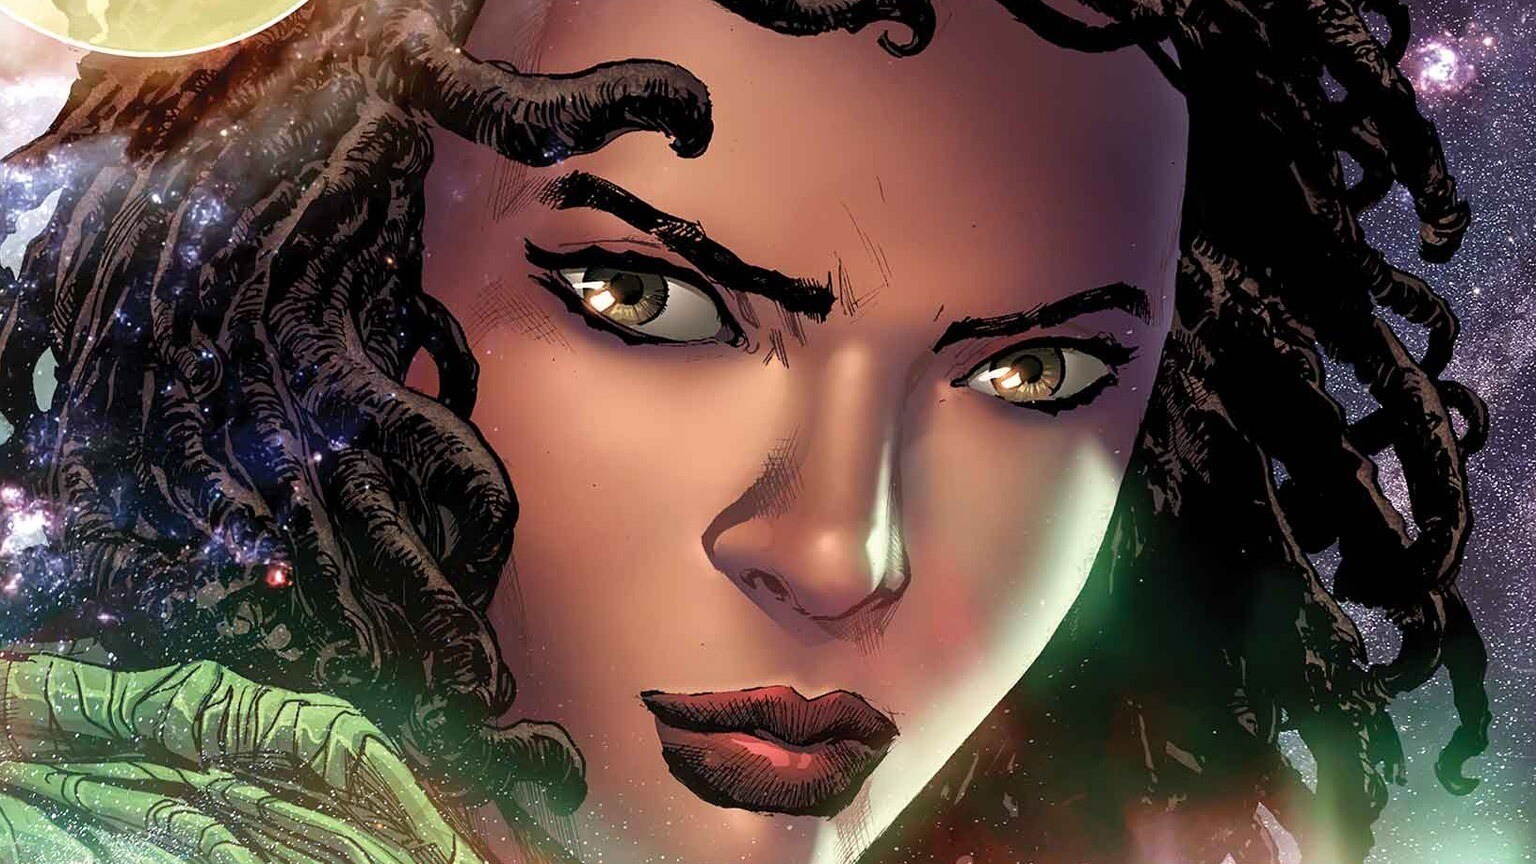 Sana Starros Strikes Out on Her Own and More from Marvel’s February 2023 Star Wars Comics - Exclusive Preview